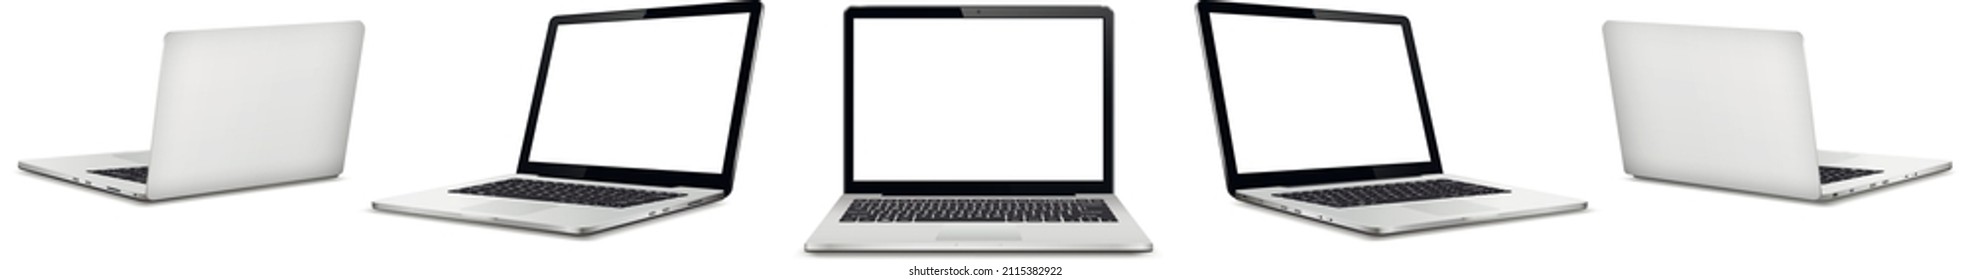 Laptop front and back side mock up isolated